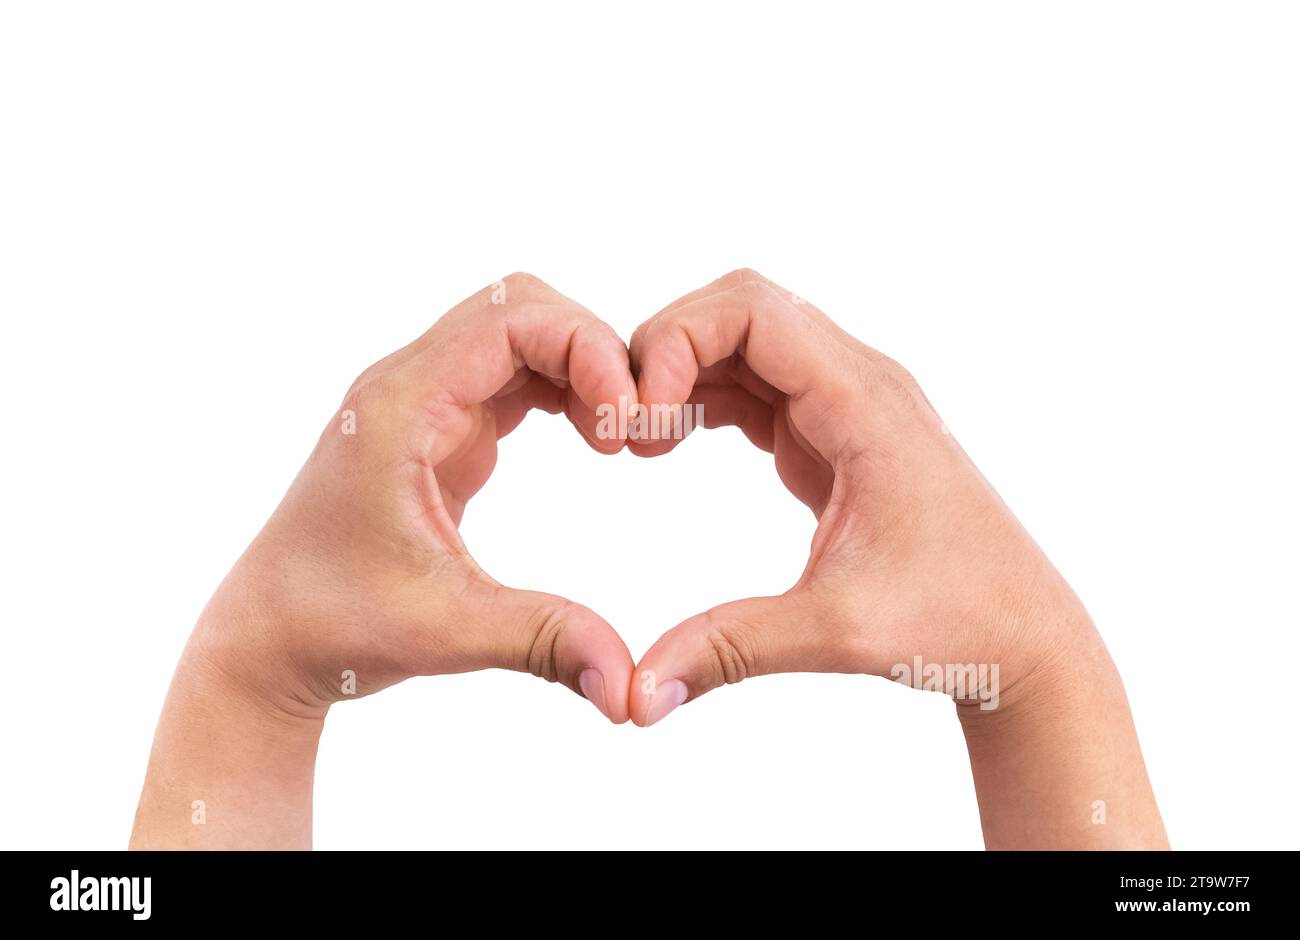 man hands in the form of heart against the white background, hands in shape of love heart valentine day concept Stock Photo